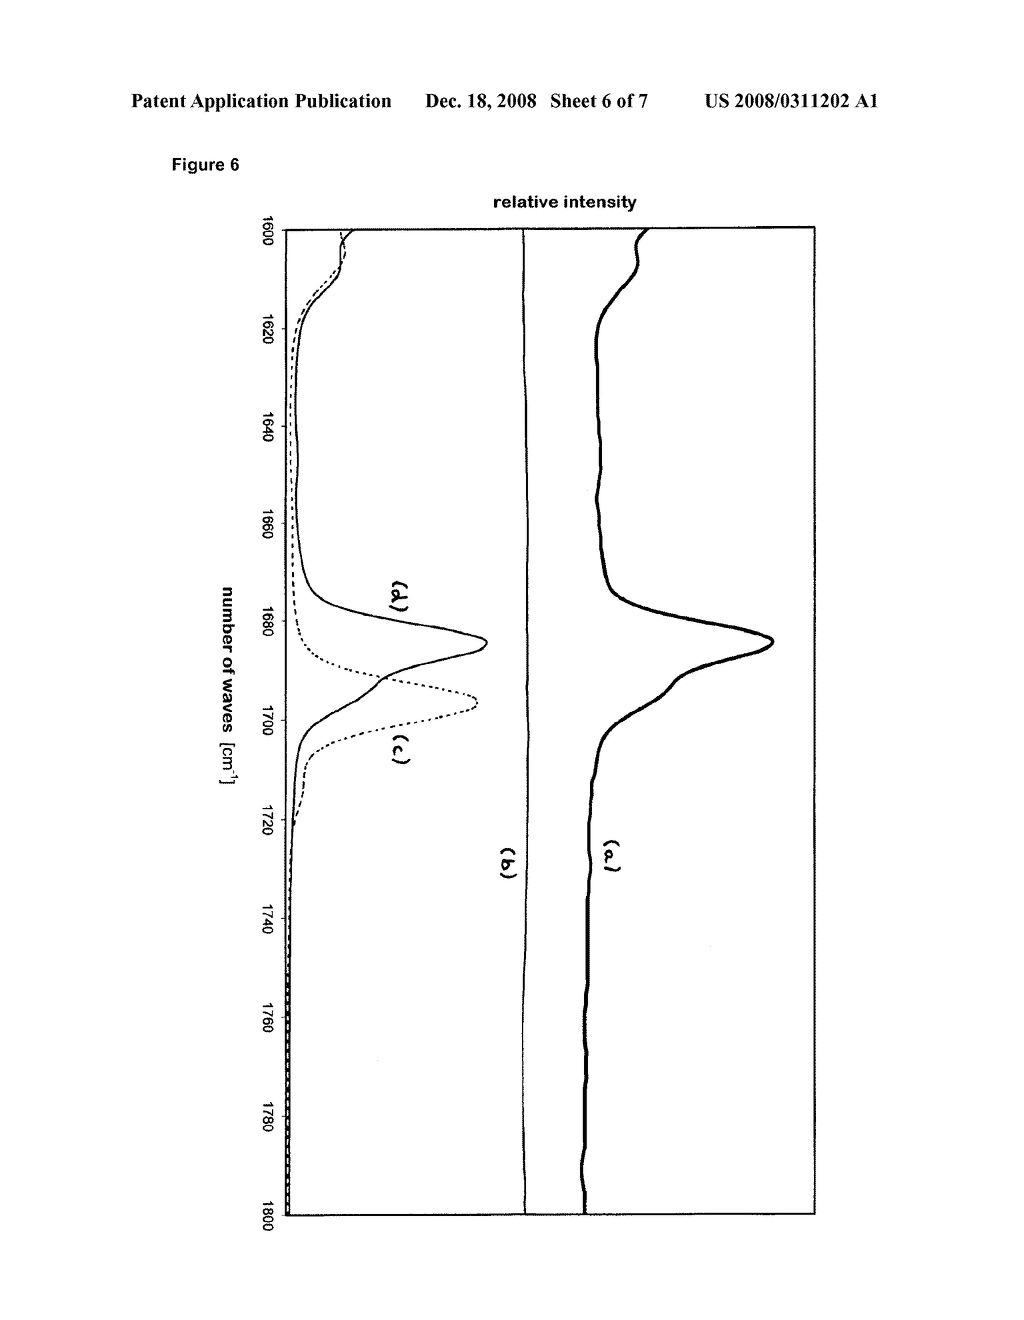 Pharmaceutical Composition Containing Donepezil Hydrochloride, Tablets Produced Therefrom and Methods for Producing the Same - diagram, schematic, and image 07